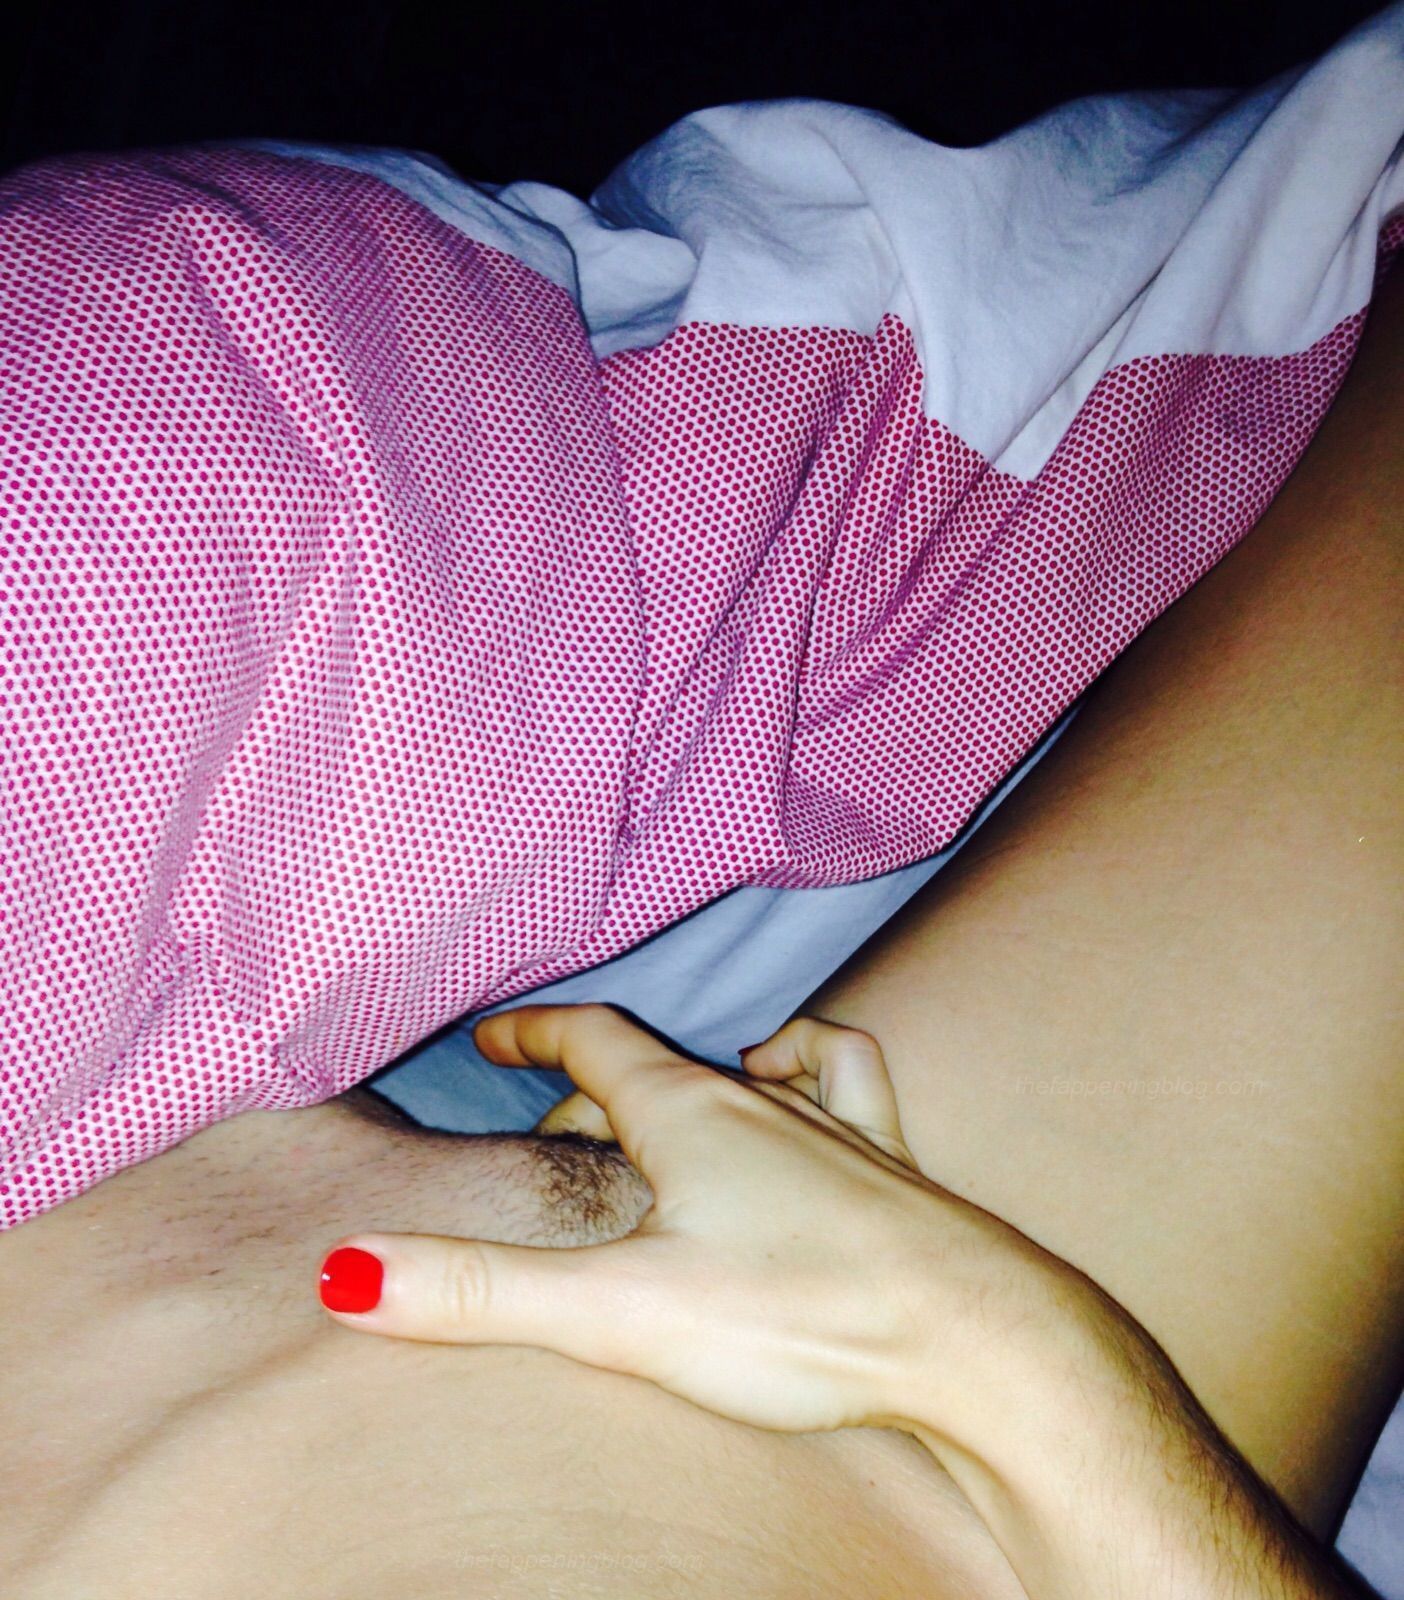 Jade Nimmo Nude Leaked The Fappening (175 Photos + Videos)